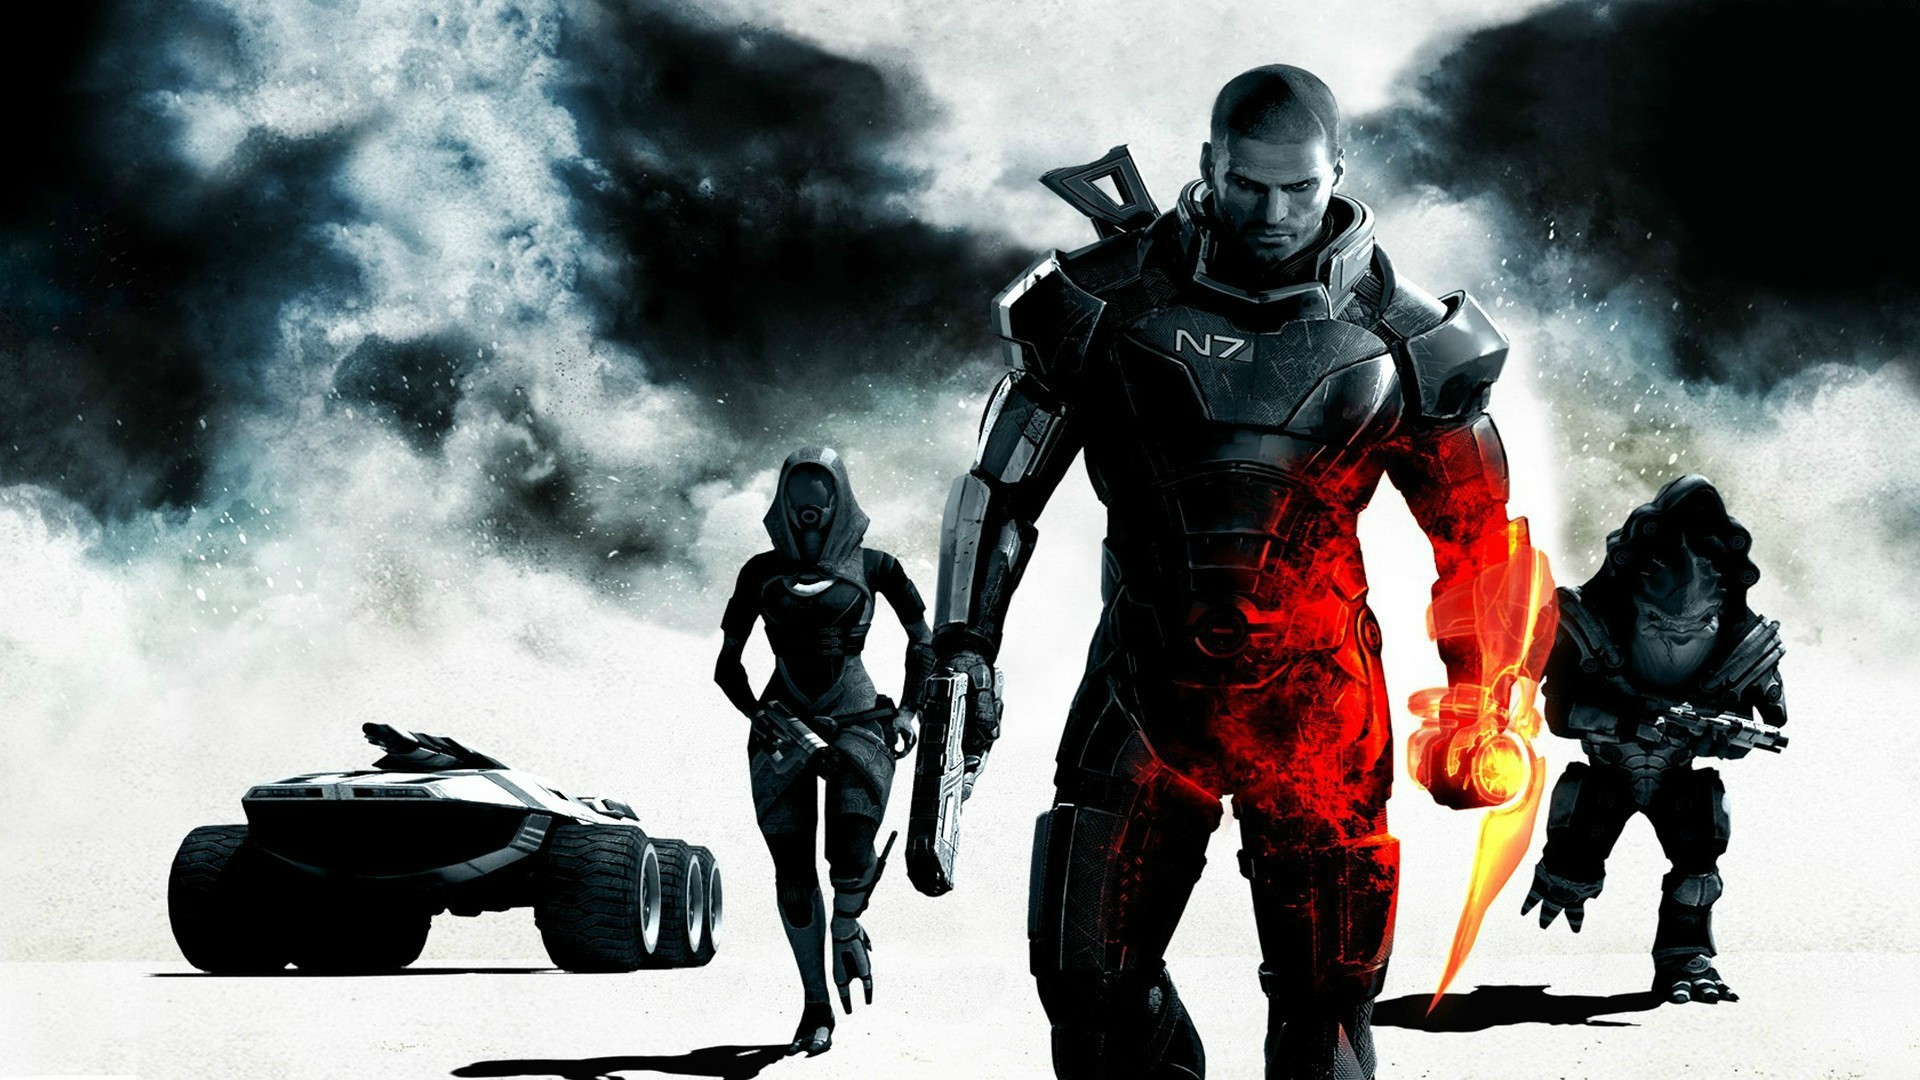 1920x1080 Mass Effect 3 and Battlefield 3 mashup. Two awesome games in a single  wallpaper.